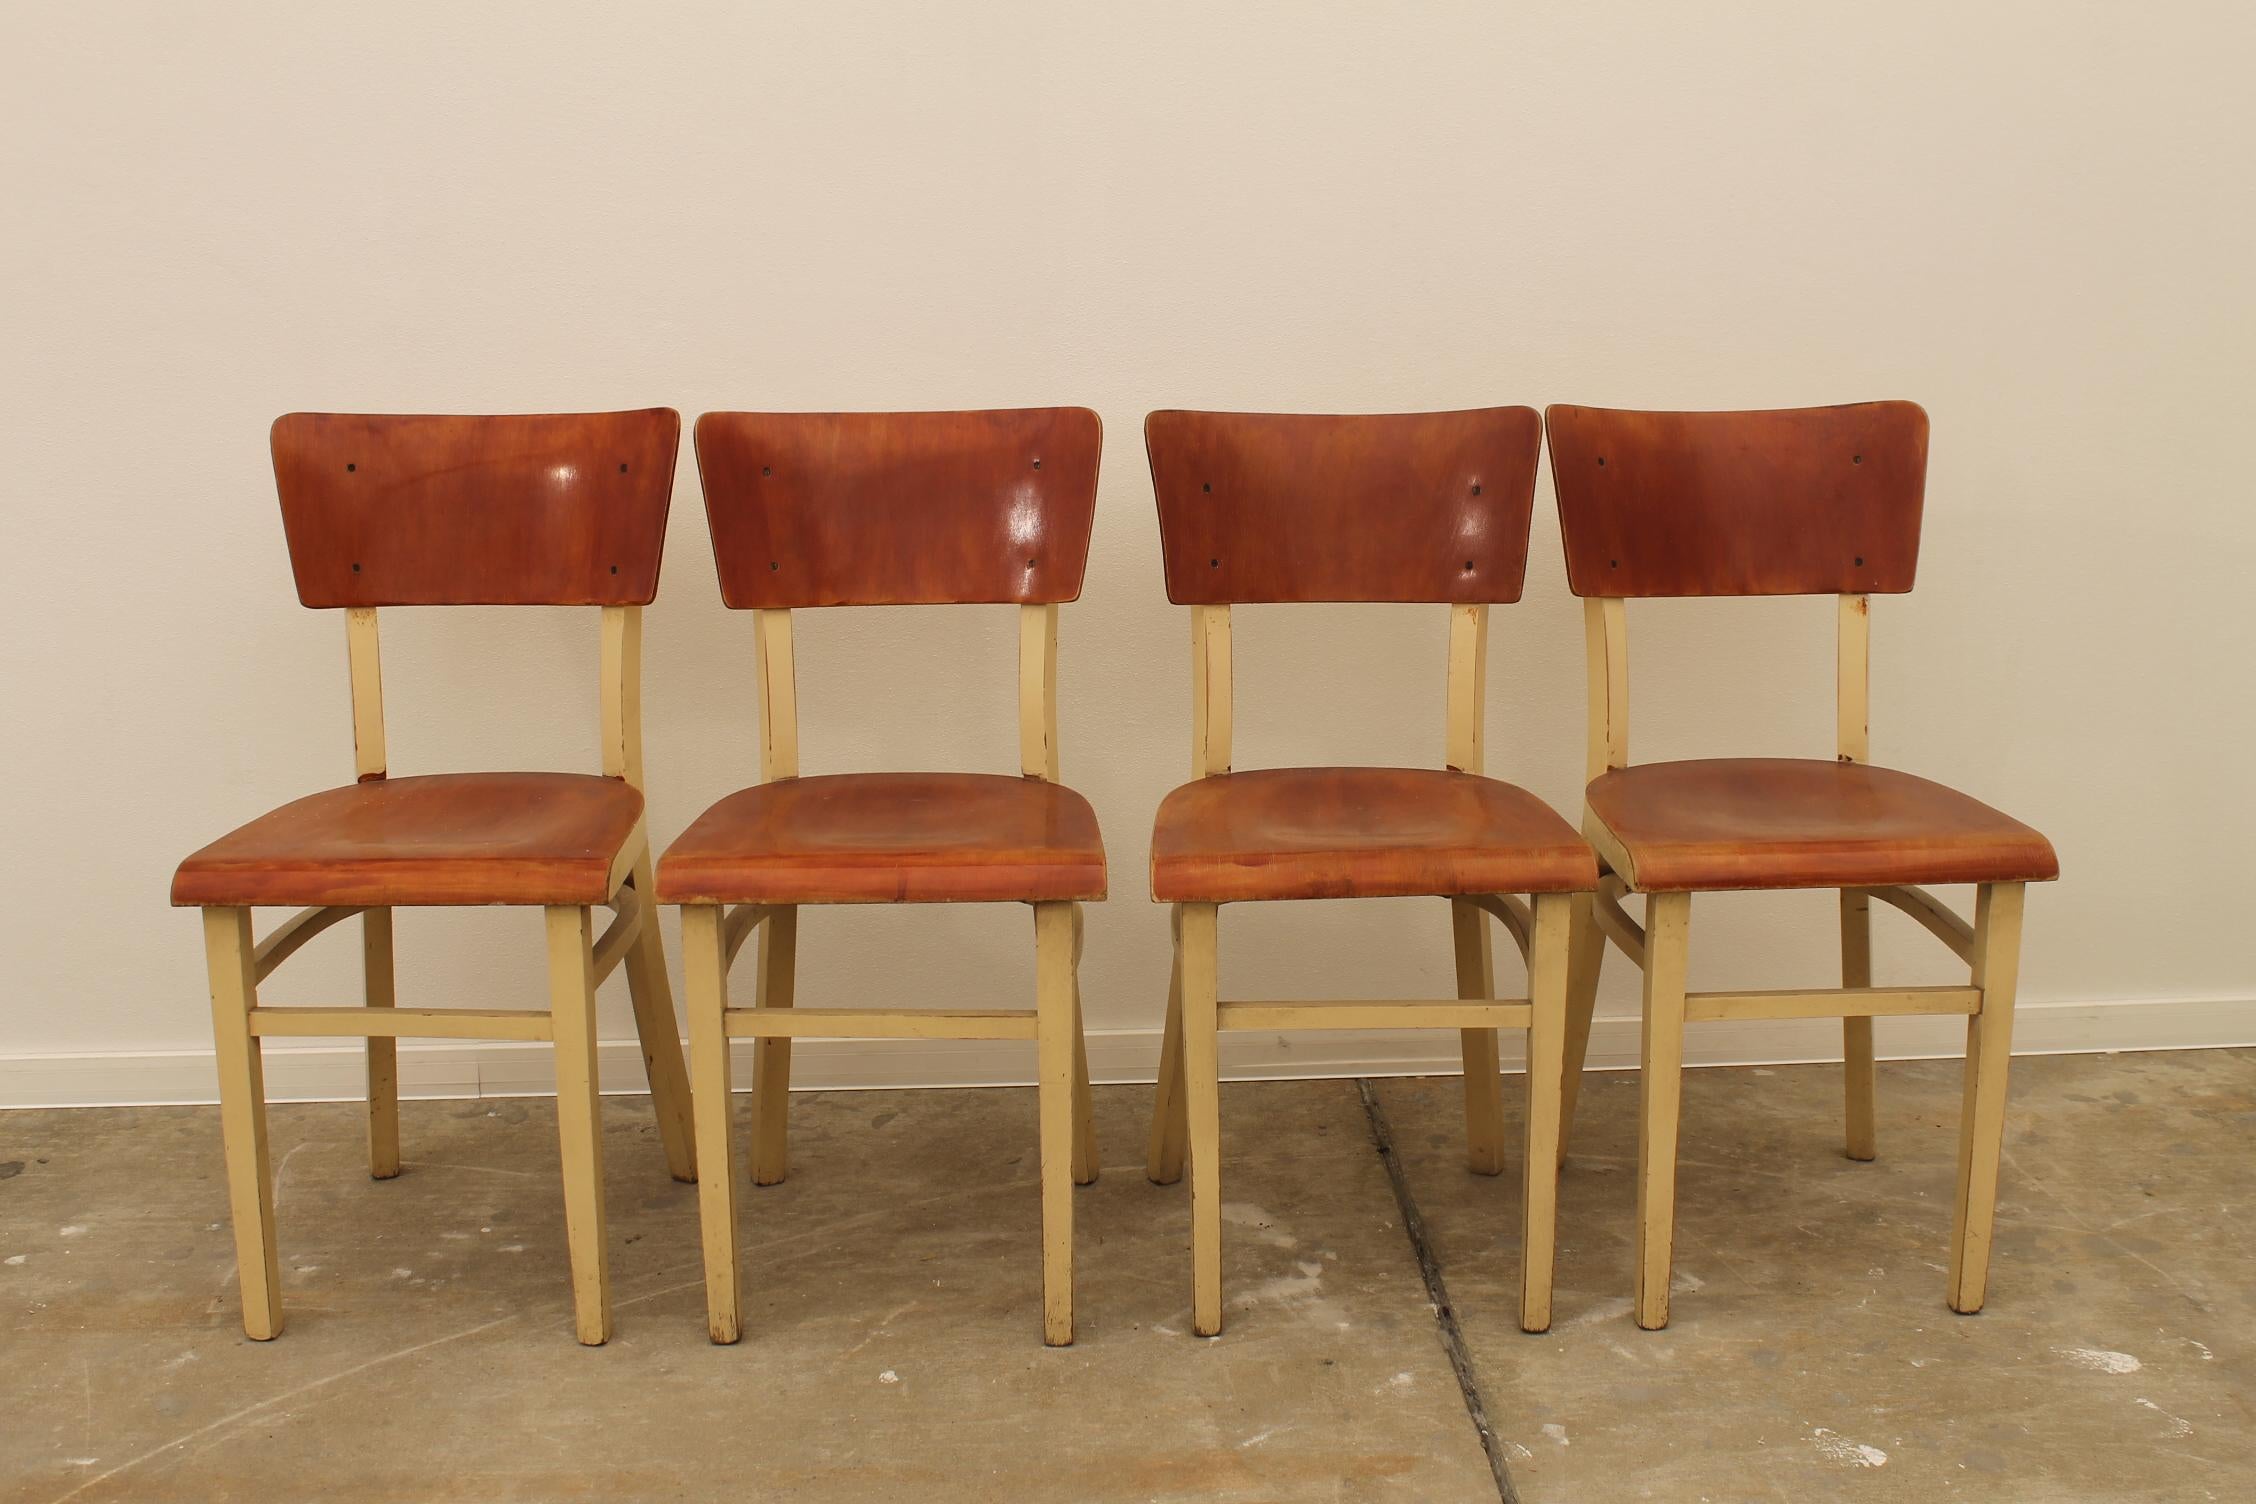 Set of four dining chairs, probably made by TON, made in the the former Czechoslovakia in the 1950´s. It´s made of wood and plywood. In good Vintage condition. Price is for the set of four.

Measures: Height: 82 cm

Seat height: 45 cm.